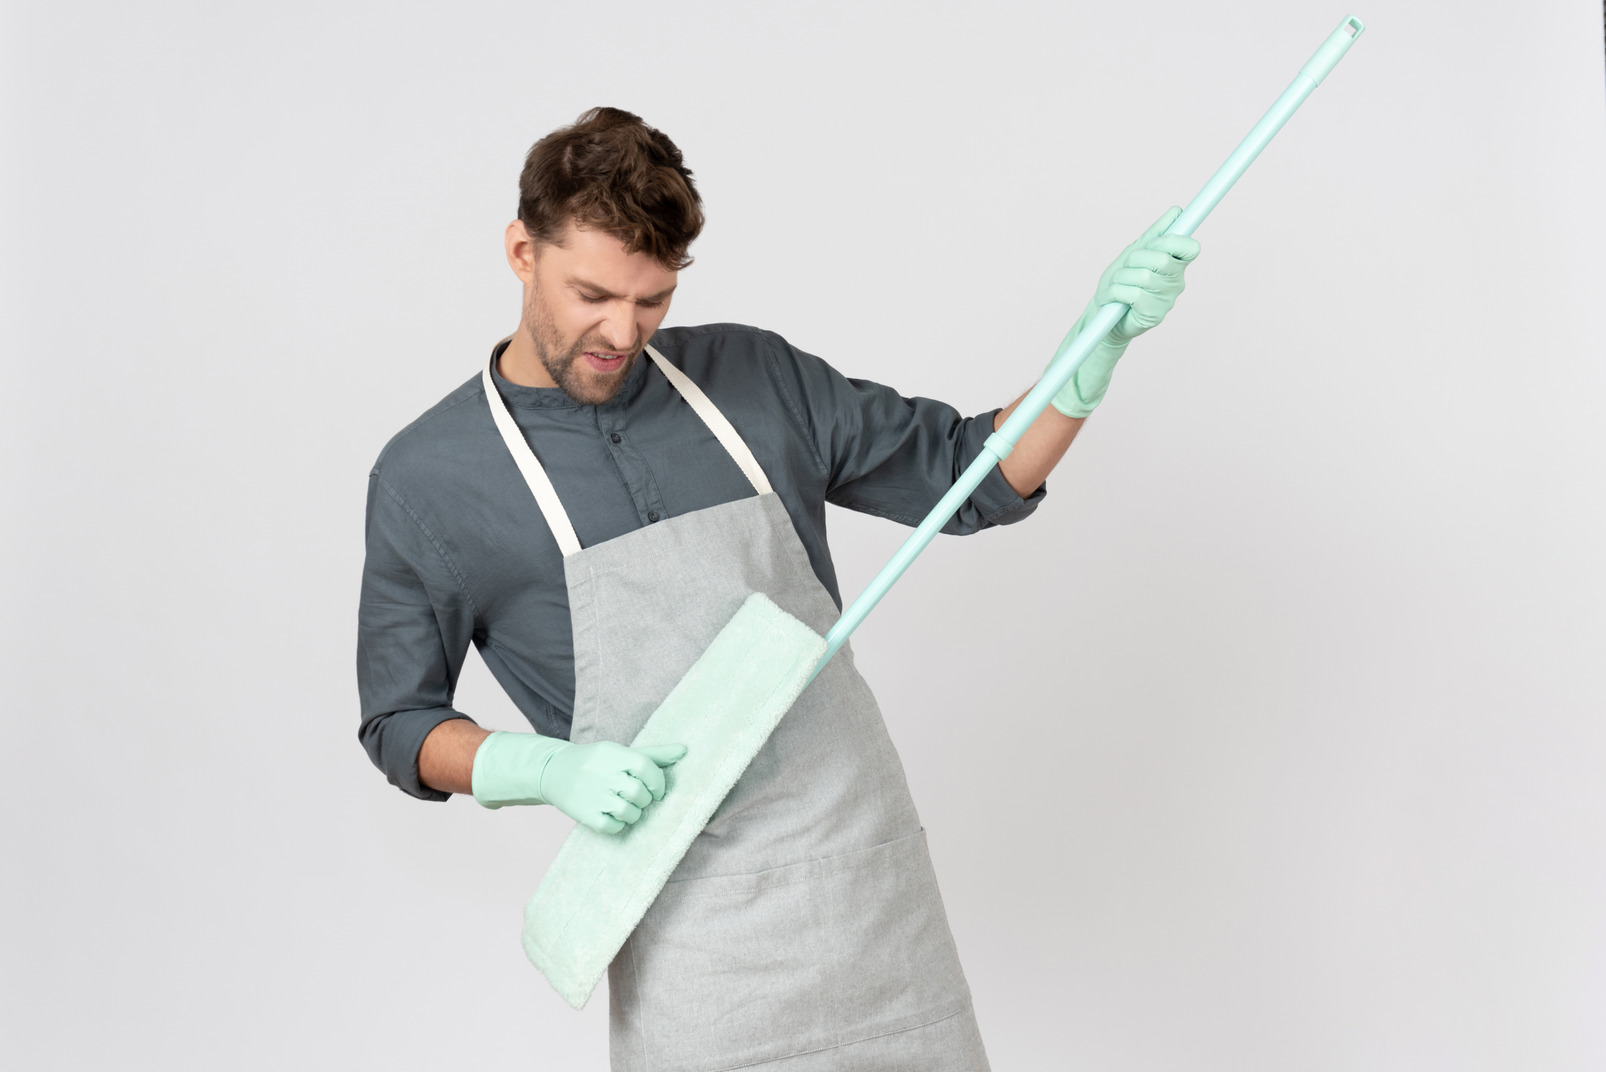 Excited househusband holding mop like a guitar